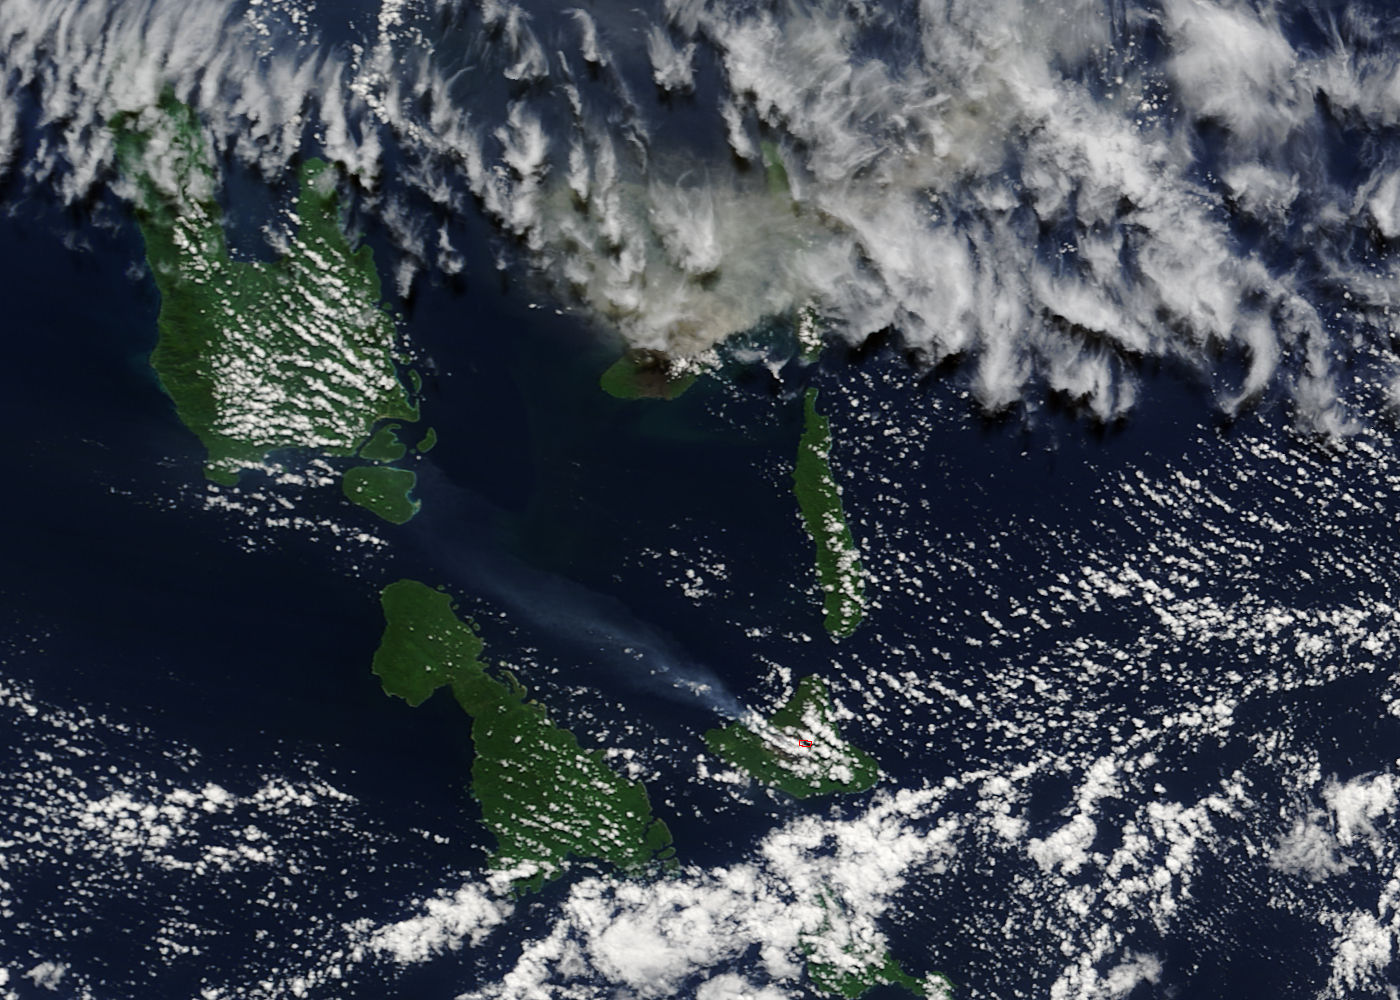 Plumes from Aoba and Ambrym volcanoes, Vanuatu - related image preview